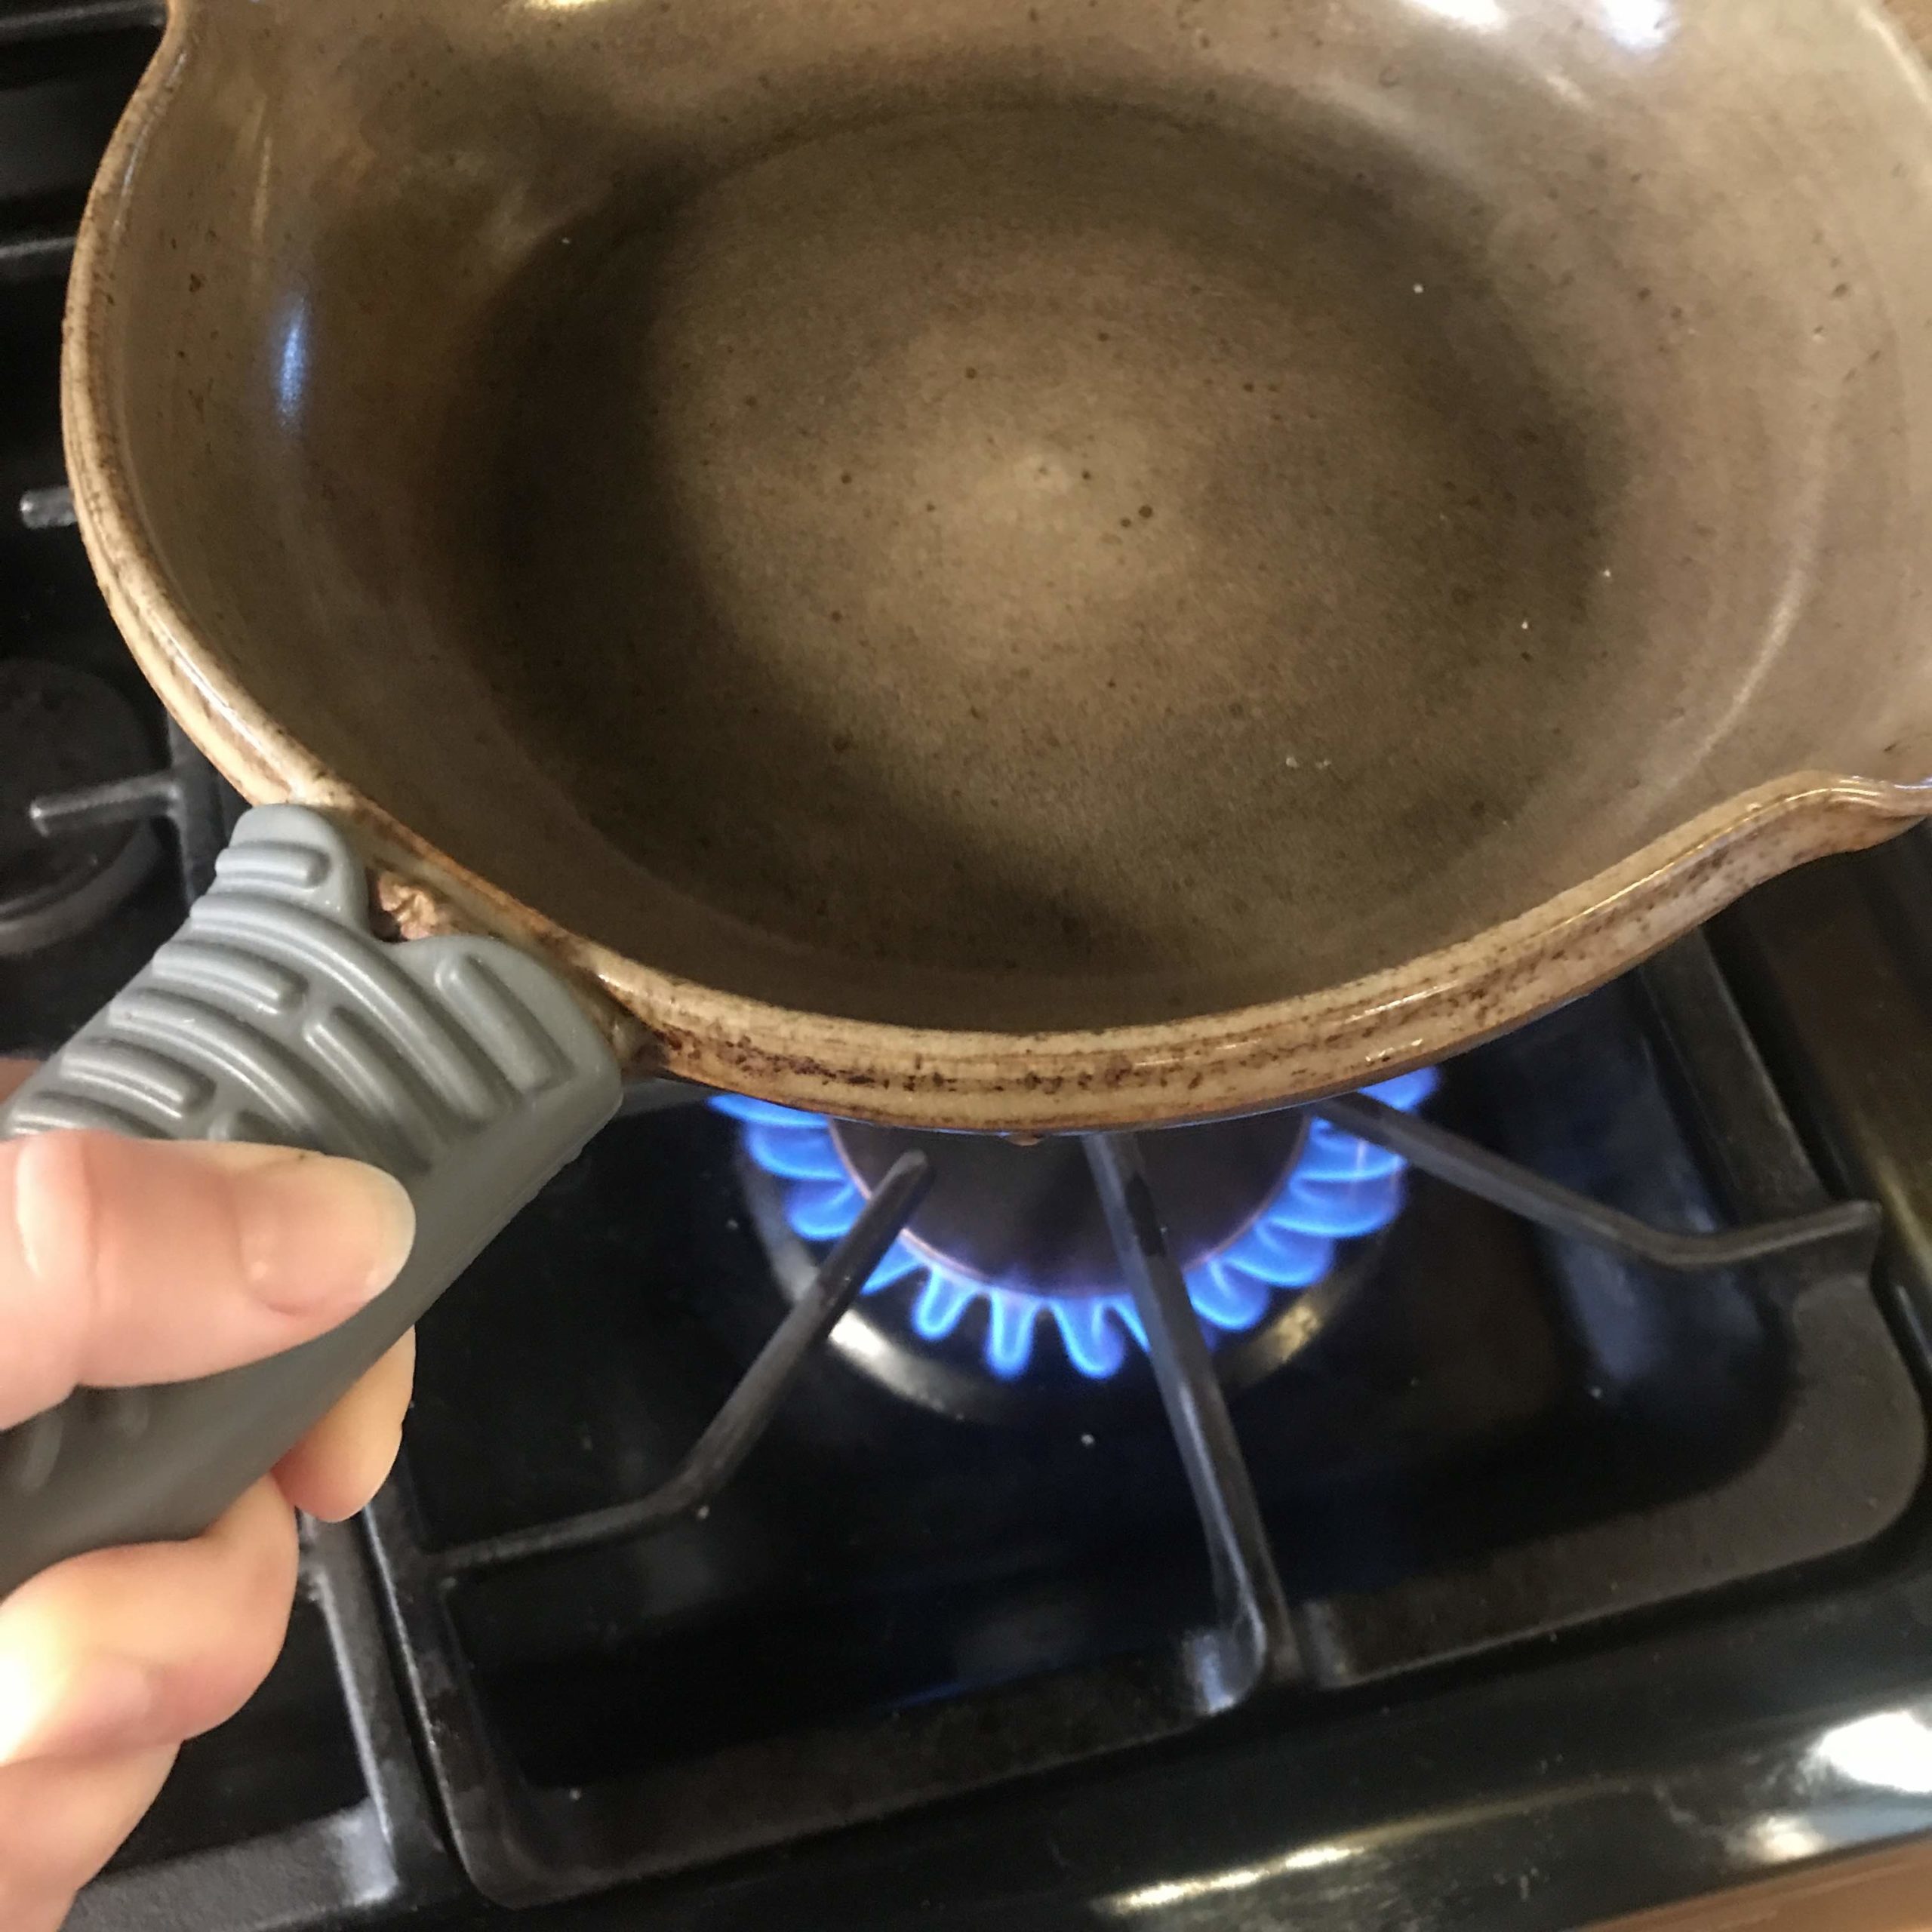 Le Creuset Silicone Cool Tool Handle Sleeve on our flameware small skillet